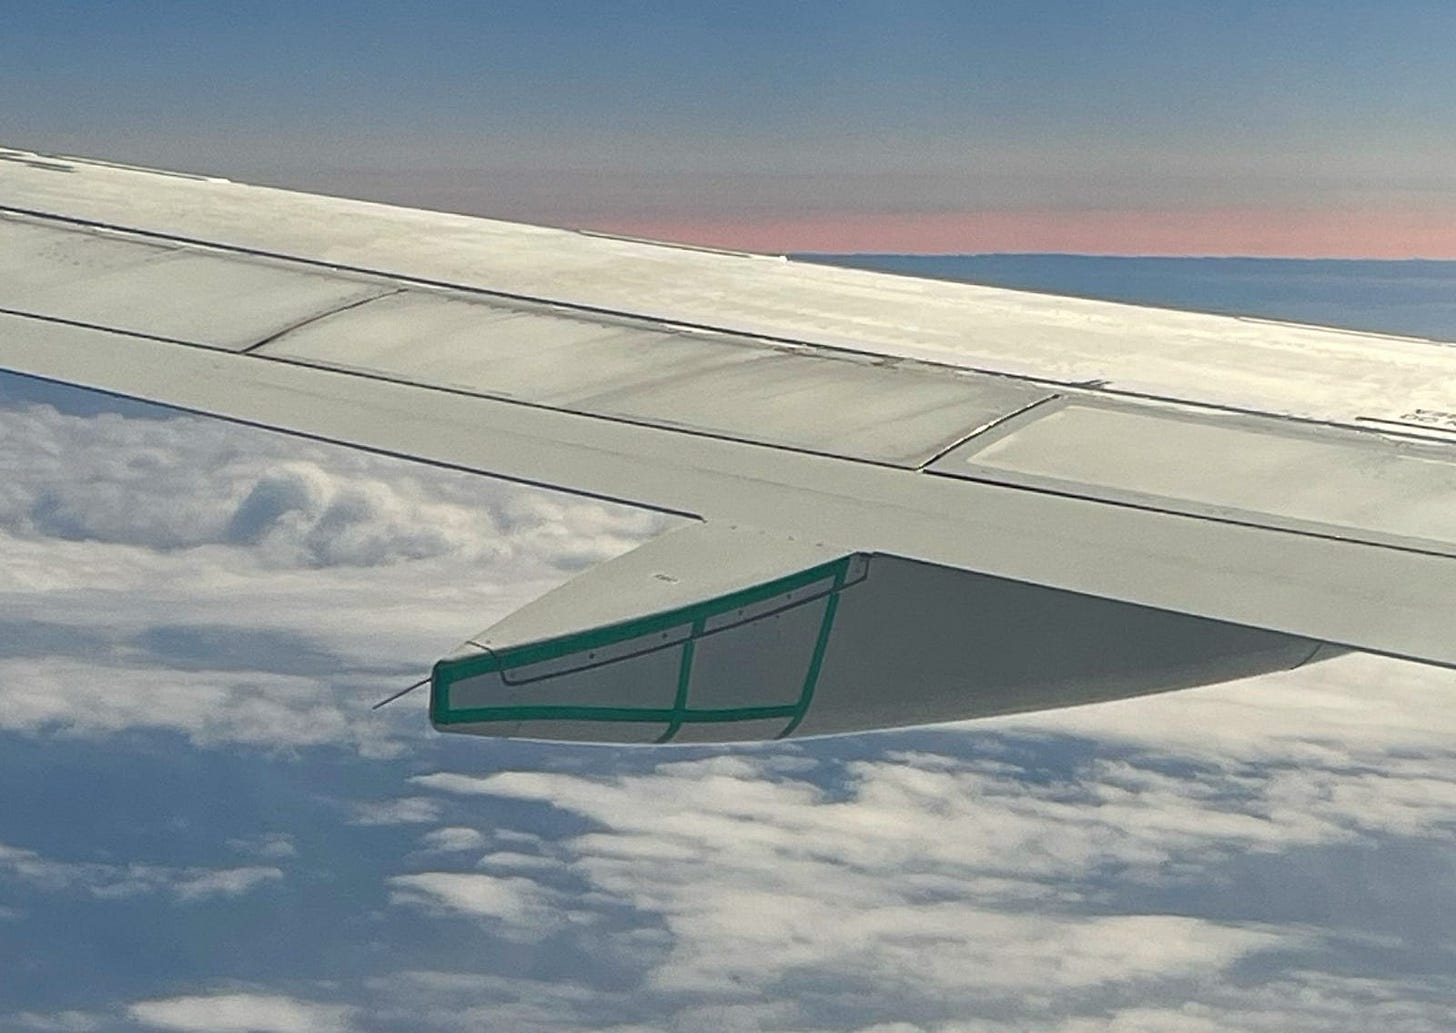 Above the wing of the airplane, you can see the horizon which looked like a sunset for about four or five minutes. It is also slightly darker, especially on the horizon, which is the area where the full eclipse occurred.